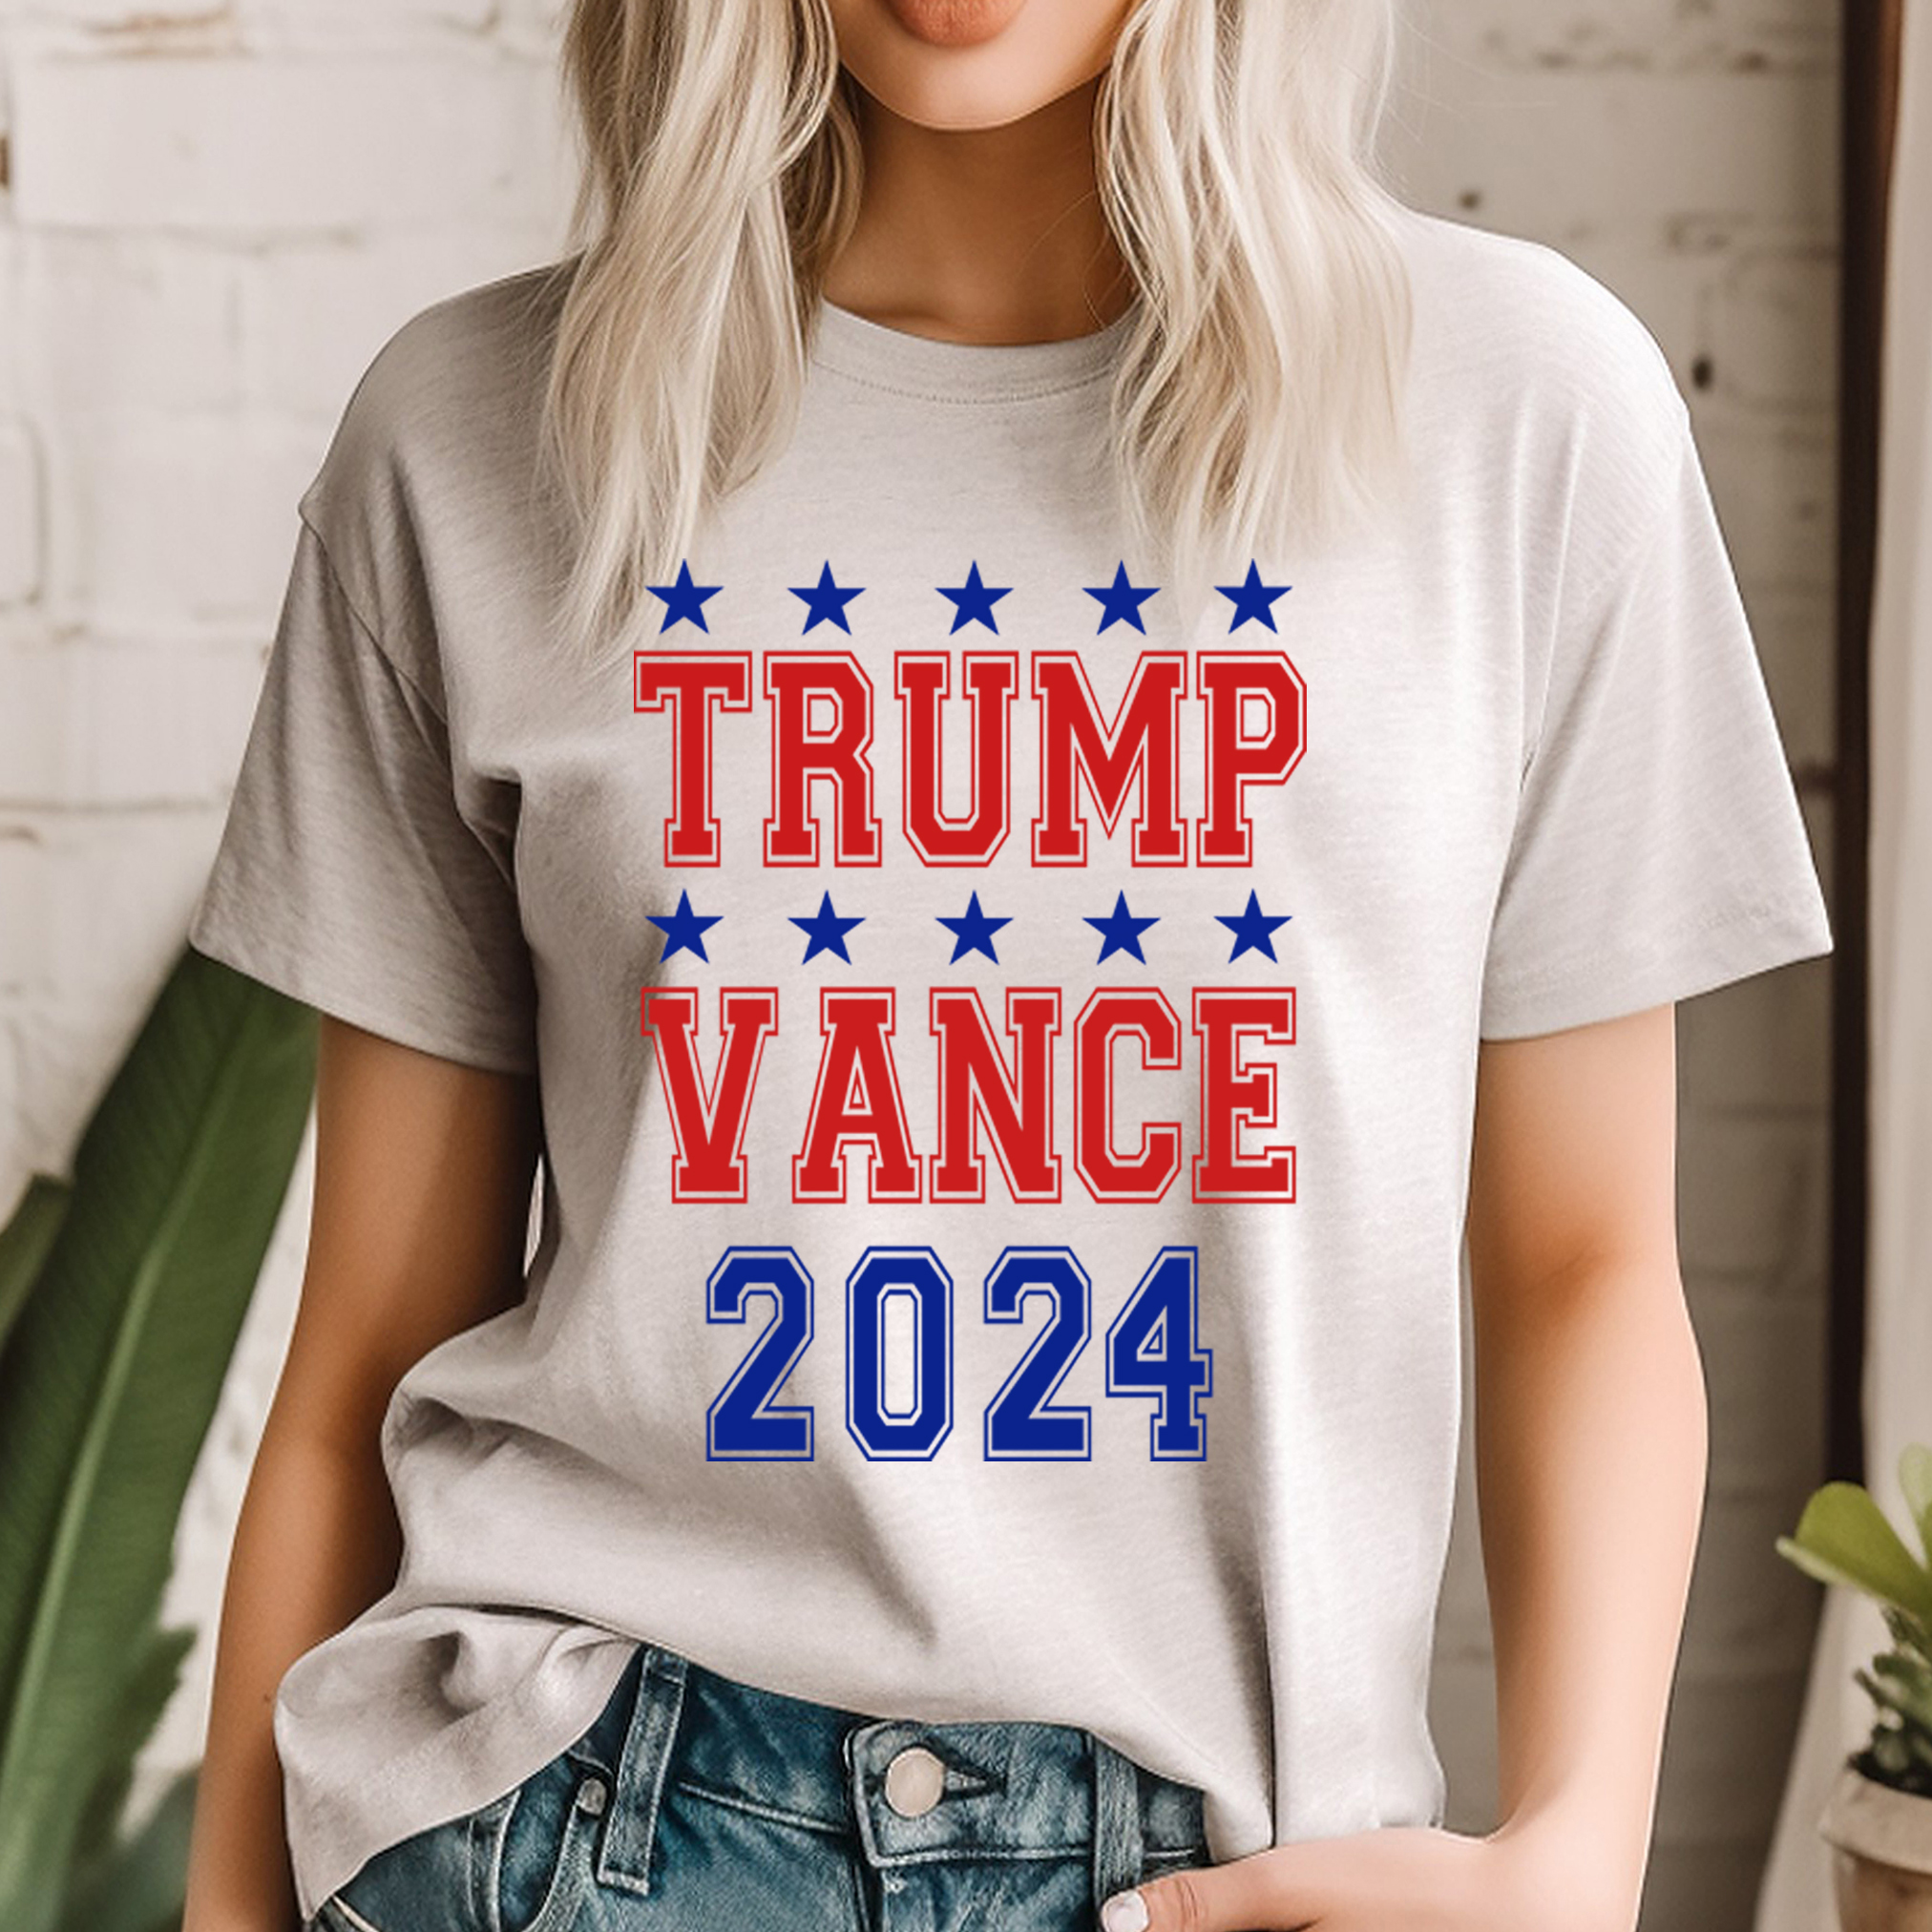 A model wearing a tan crew neck t-shirt with stars ad 2024 in blue and the words TRUMP VANCE in red